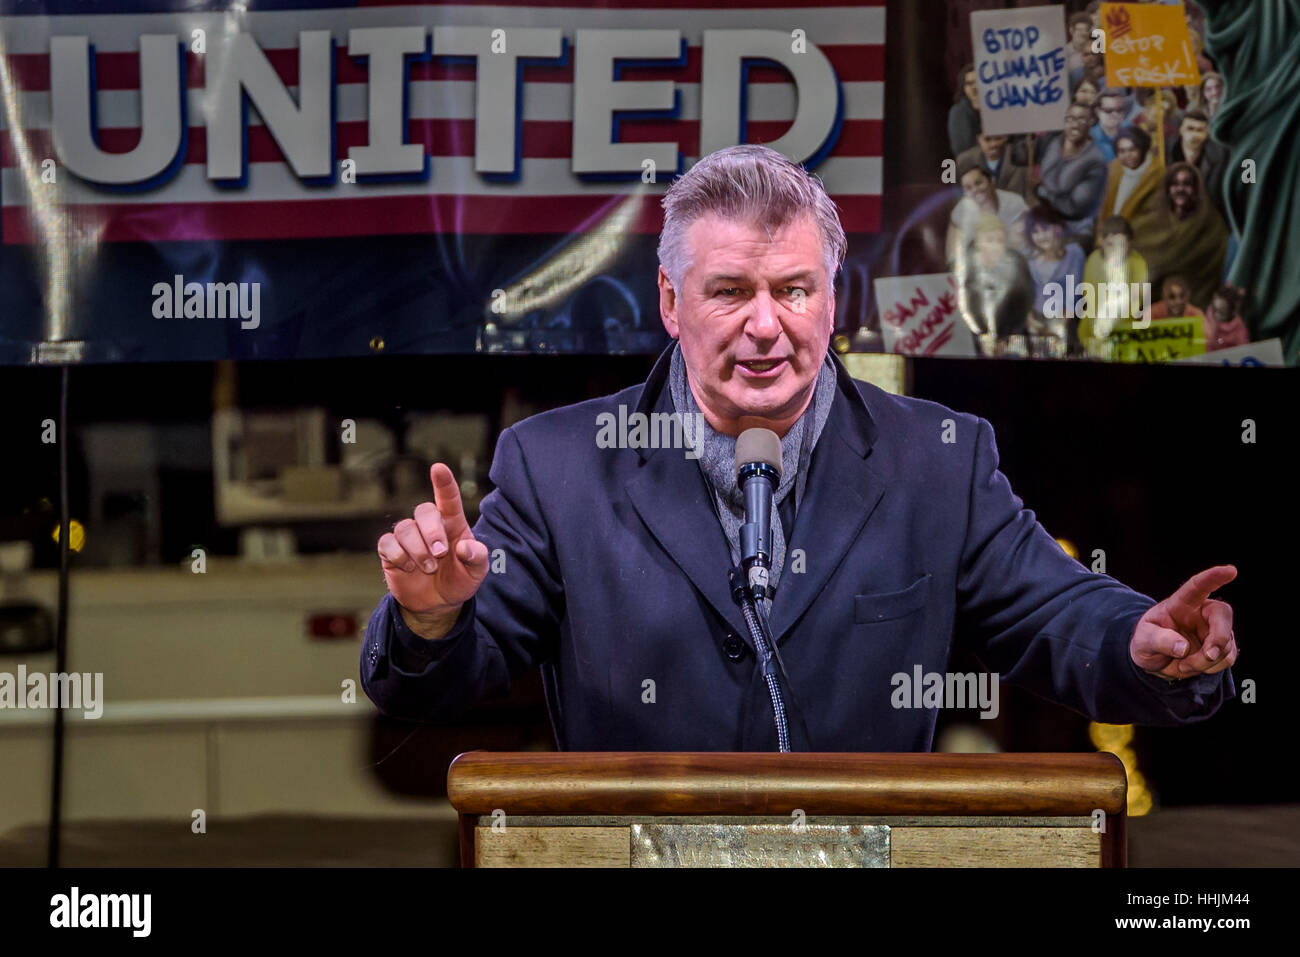 New York, USA. 19th January 2017. Alec Baldwin - On the evening before Trump’s Inauguration, NYC Mayor Bill de Blasio, Reverend Al Sharpton, Mark Ruffalo, Michael Moore, Shailene Woodley, Rosie Perez, and Alec Baldwin will be joined by elected officials, community groups and organizations, and thousands of New Yorkers outside of Trump International Hotel & Tower near Columbus Circle to stand united and make clear to President Elect Trump and Congress that New York City will protect the rights of residents Credit: PACIFIC PRESS/Alamy Live News Stock Photo